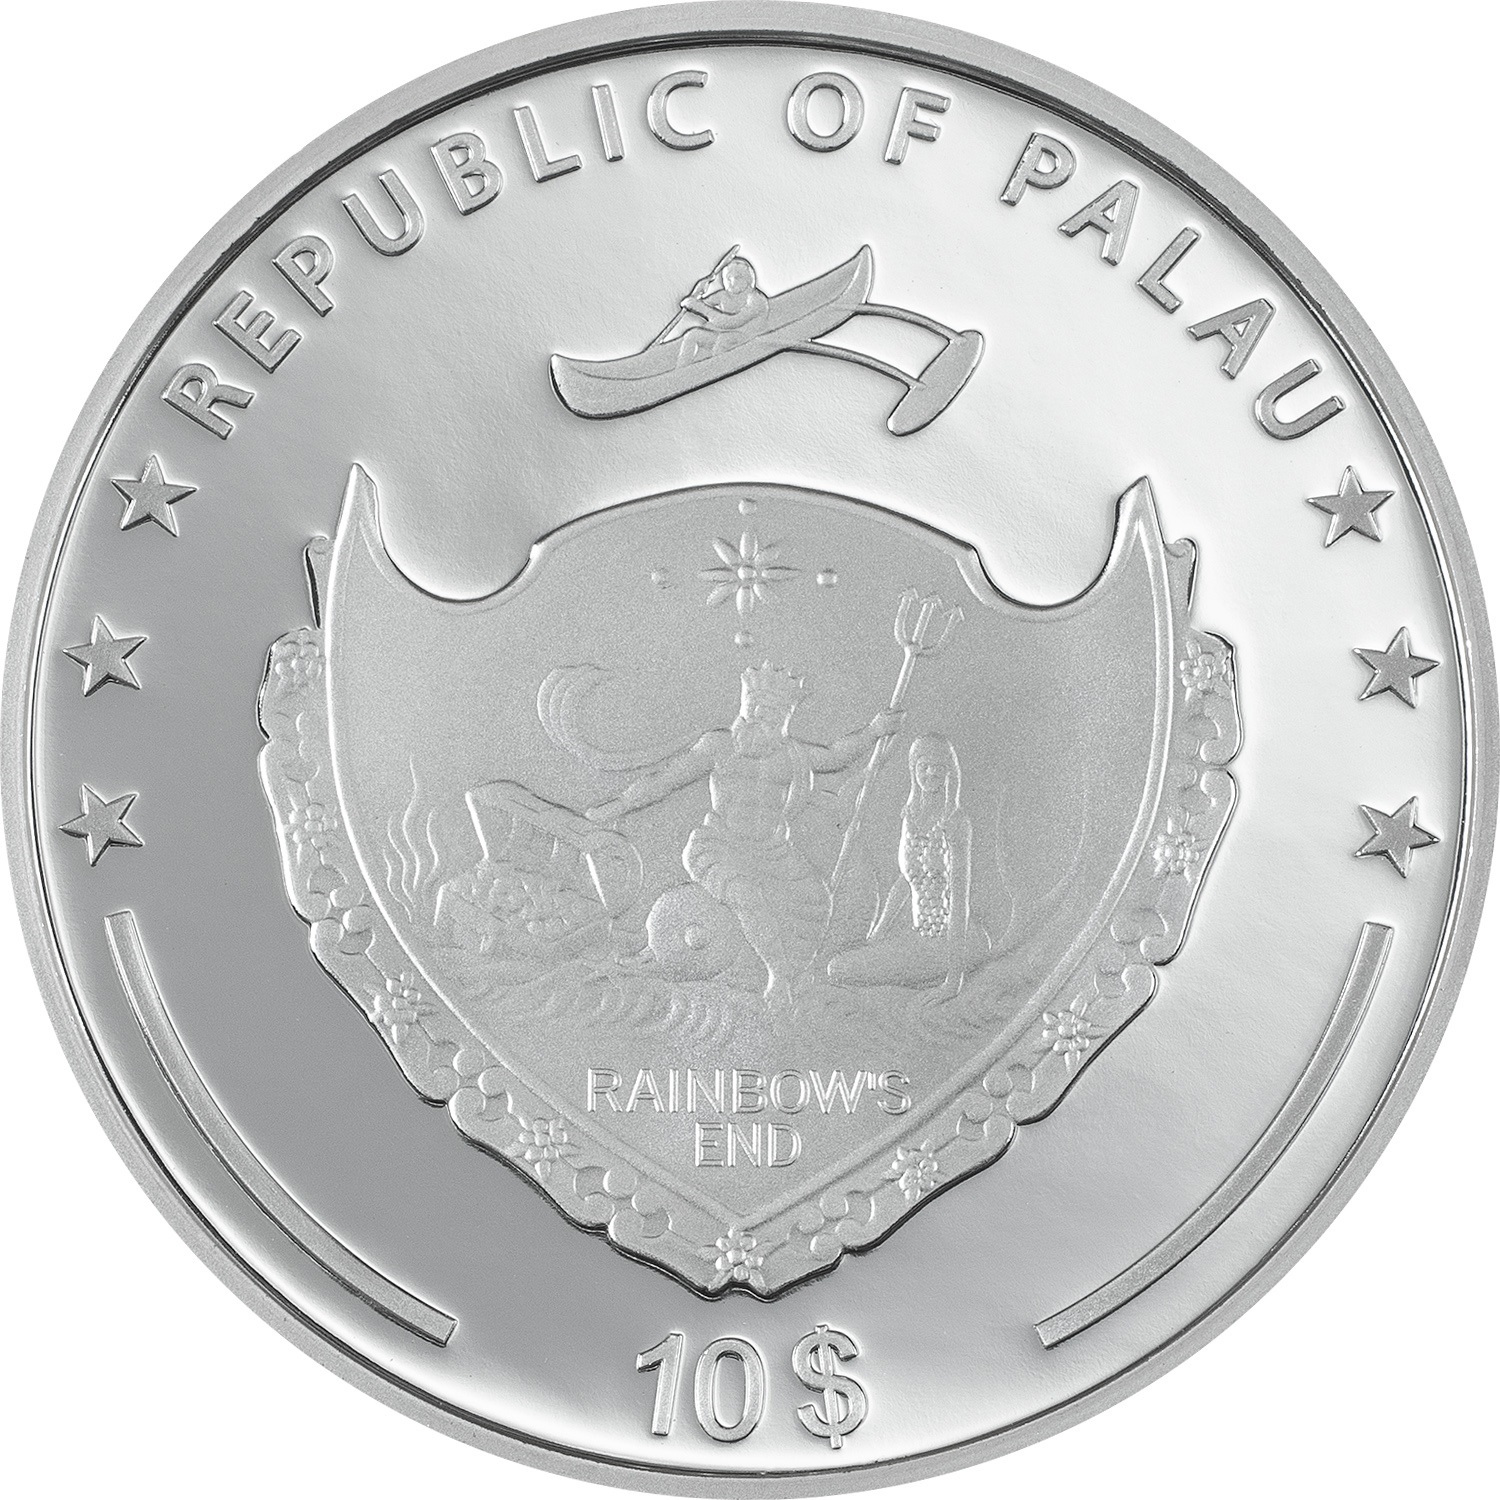 (W168.1.10.D.2023.2) Palau 10 Dollars Forget Me Not 2023 - Proof silver Obverse (zoom)